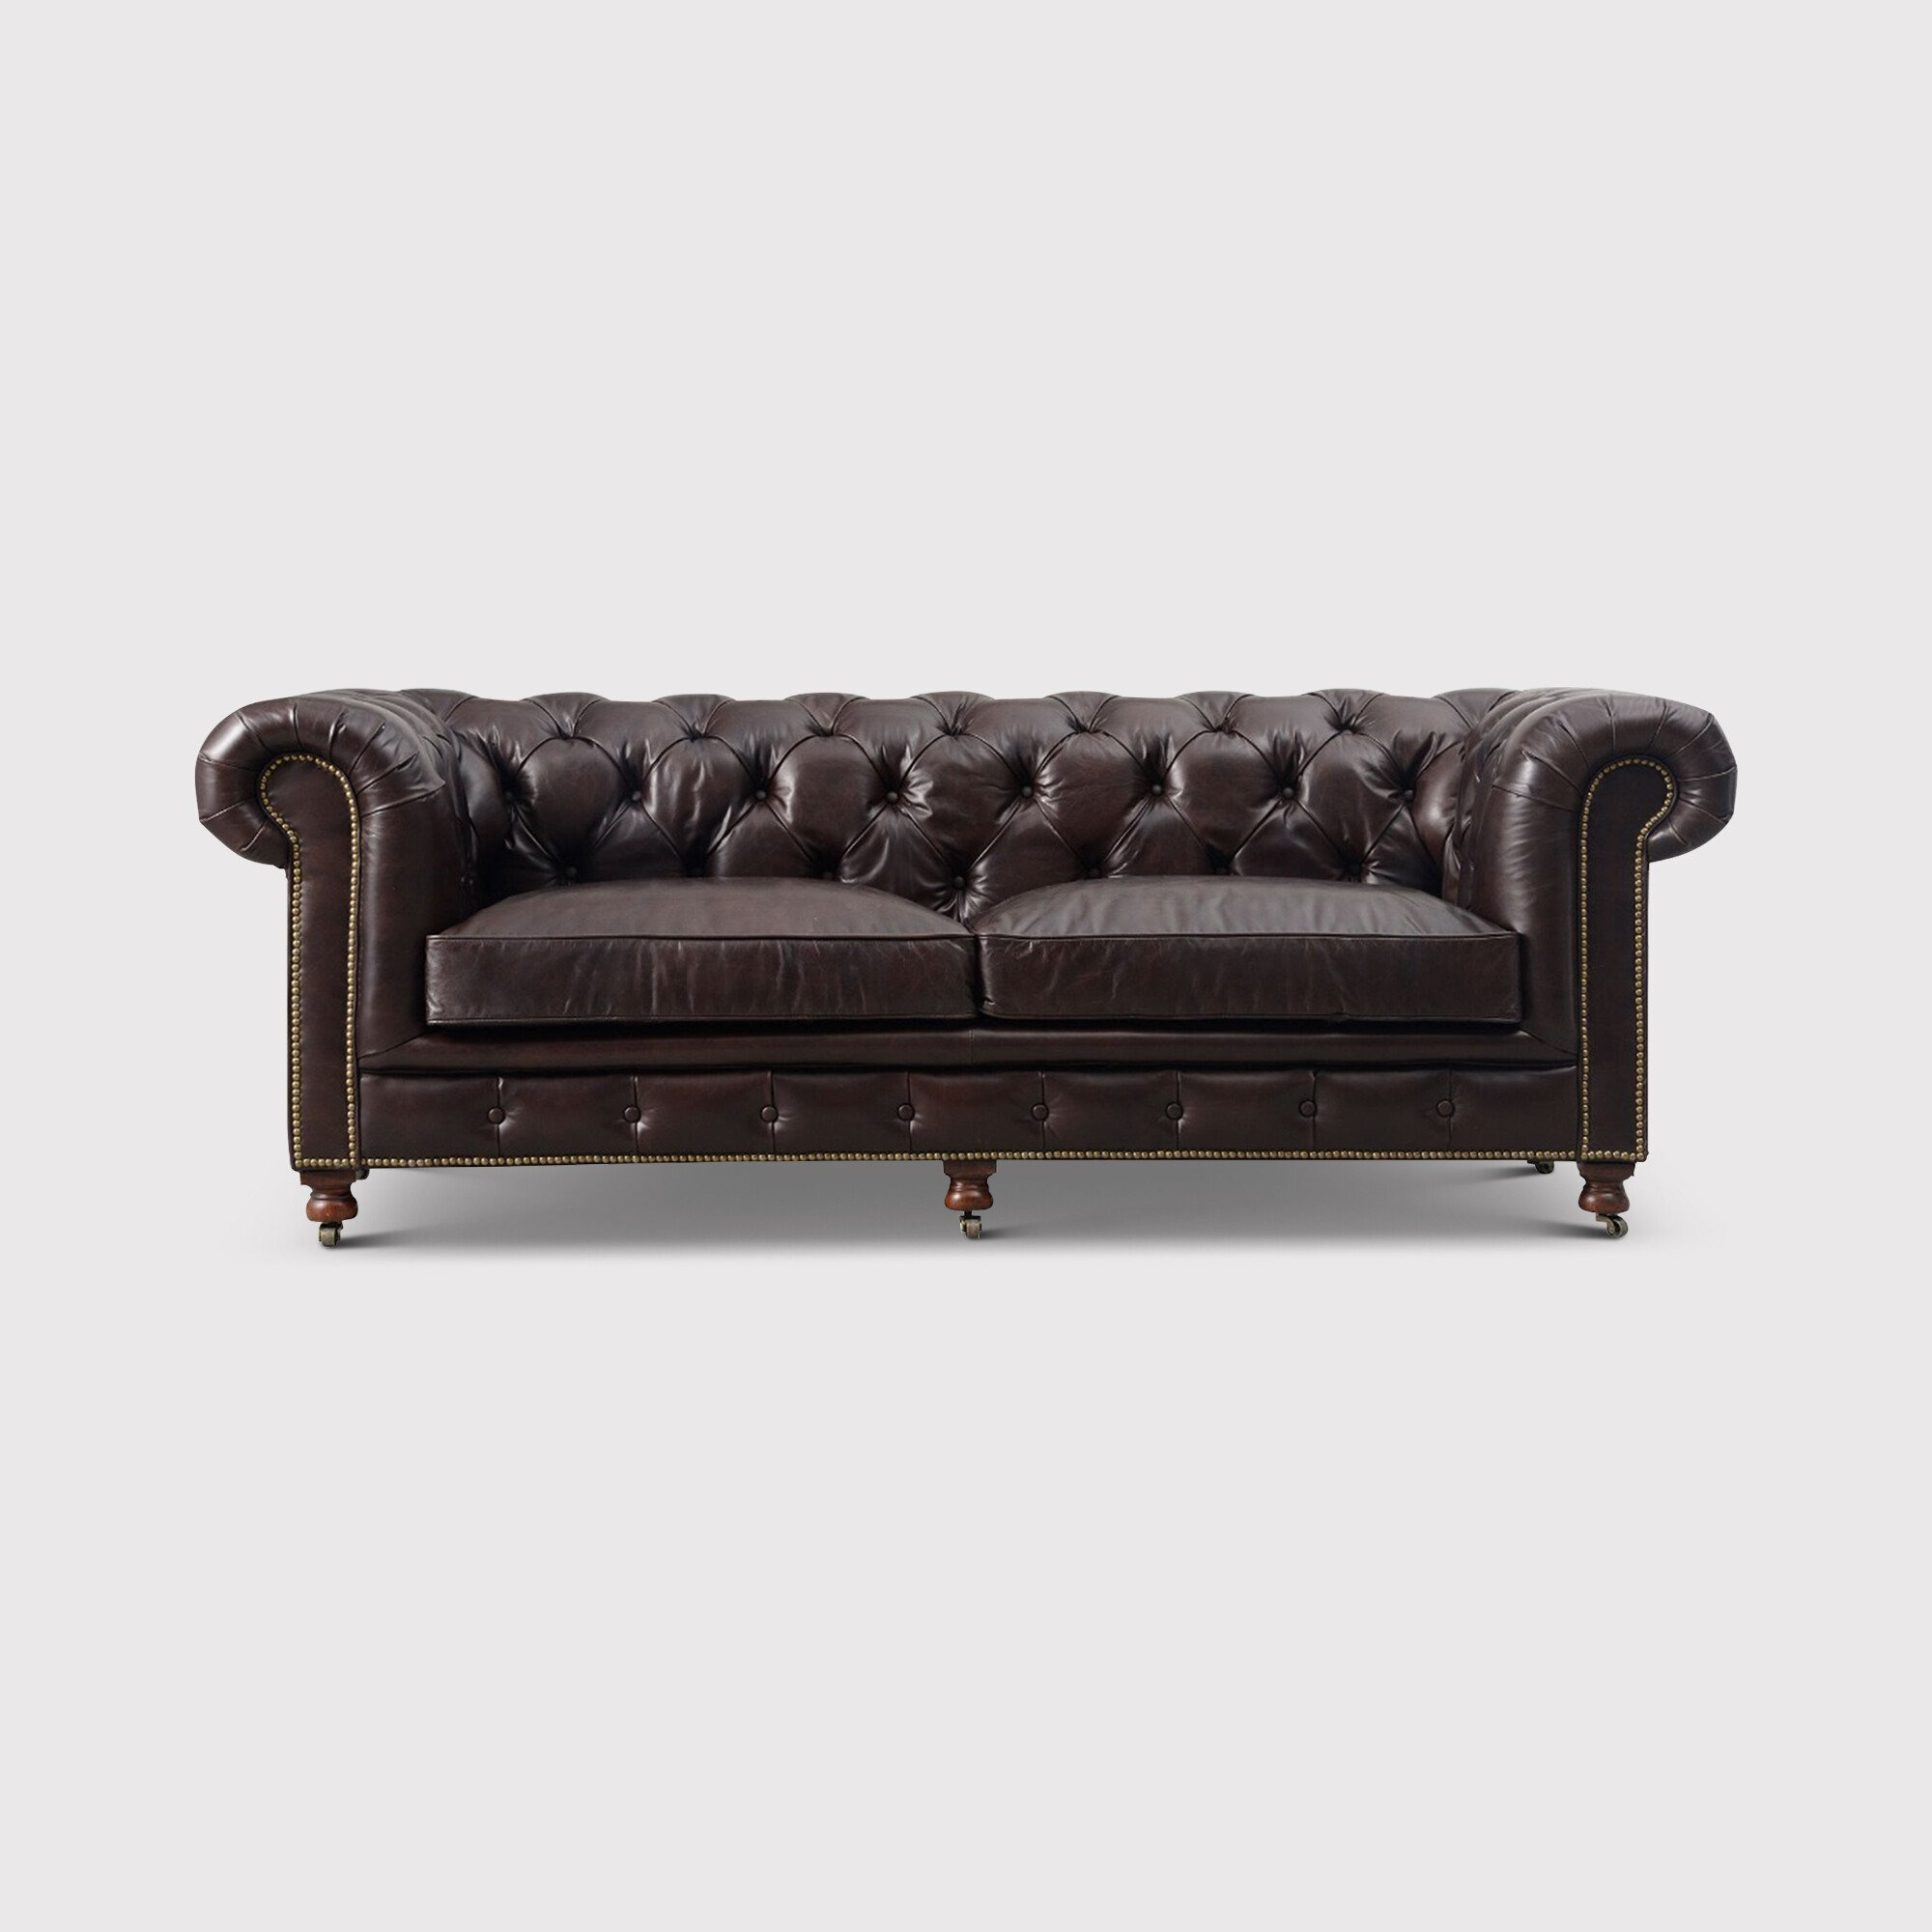 Asquith 2.5 Seater Chesterfield Sofa, Brown Leather - Barker & Stonehouse - image 1